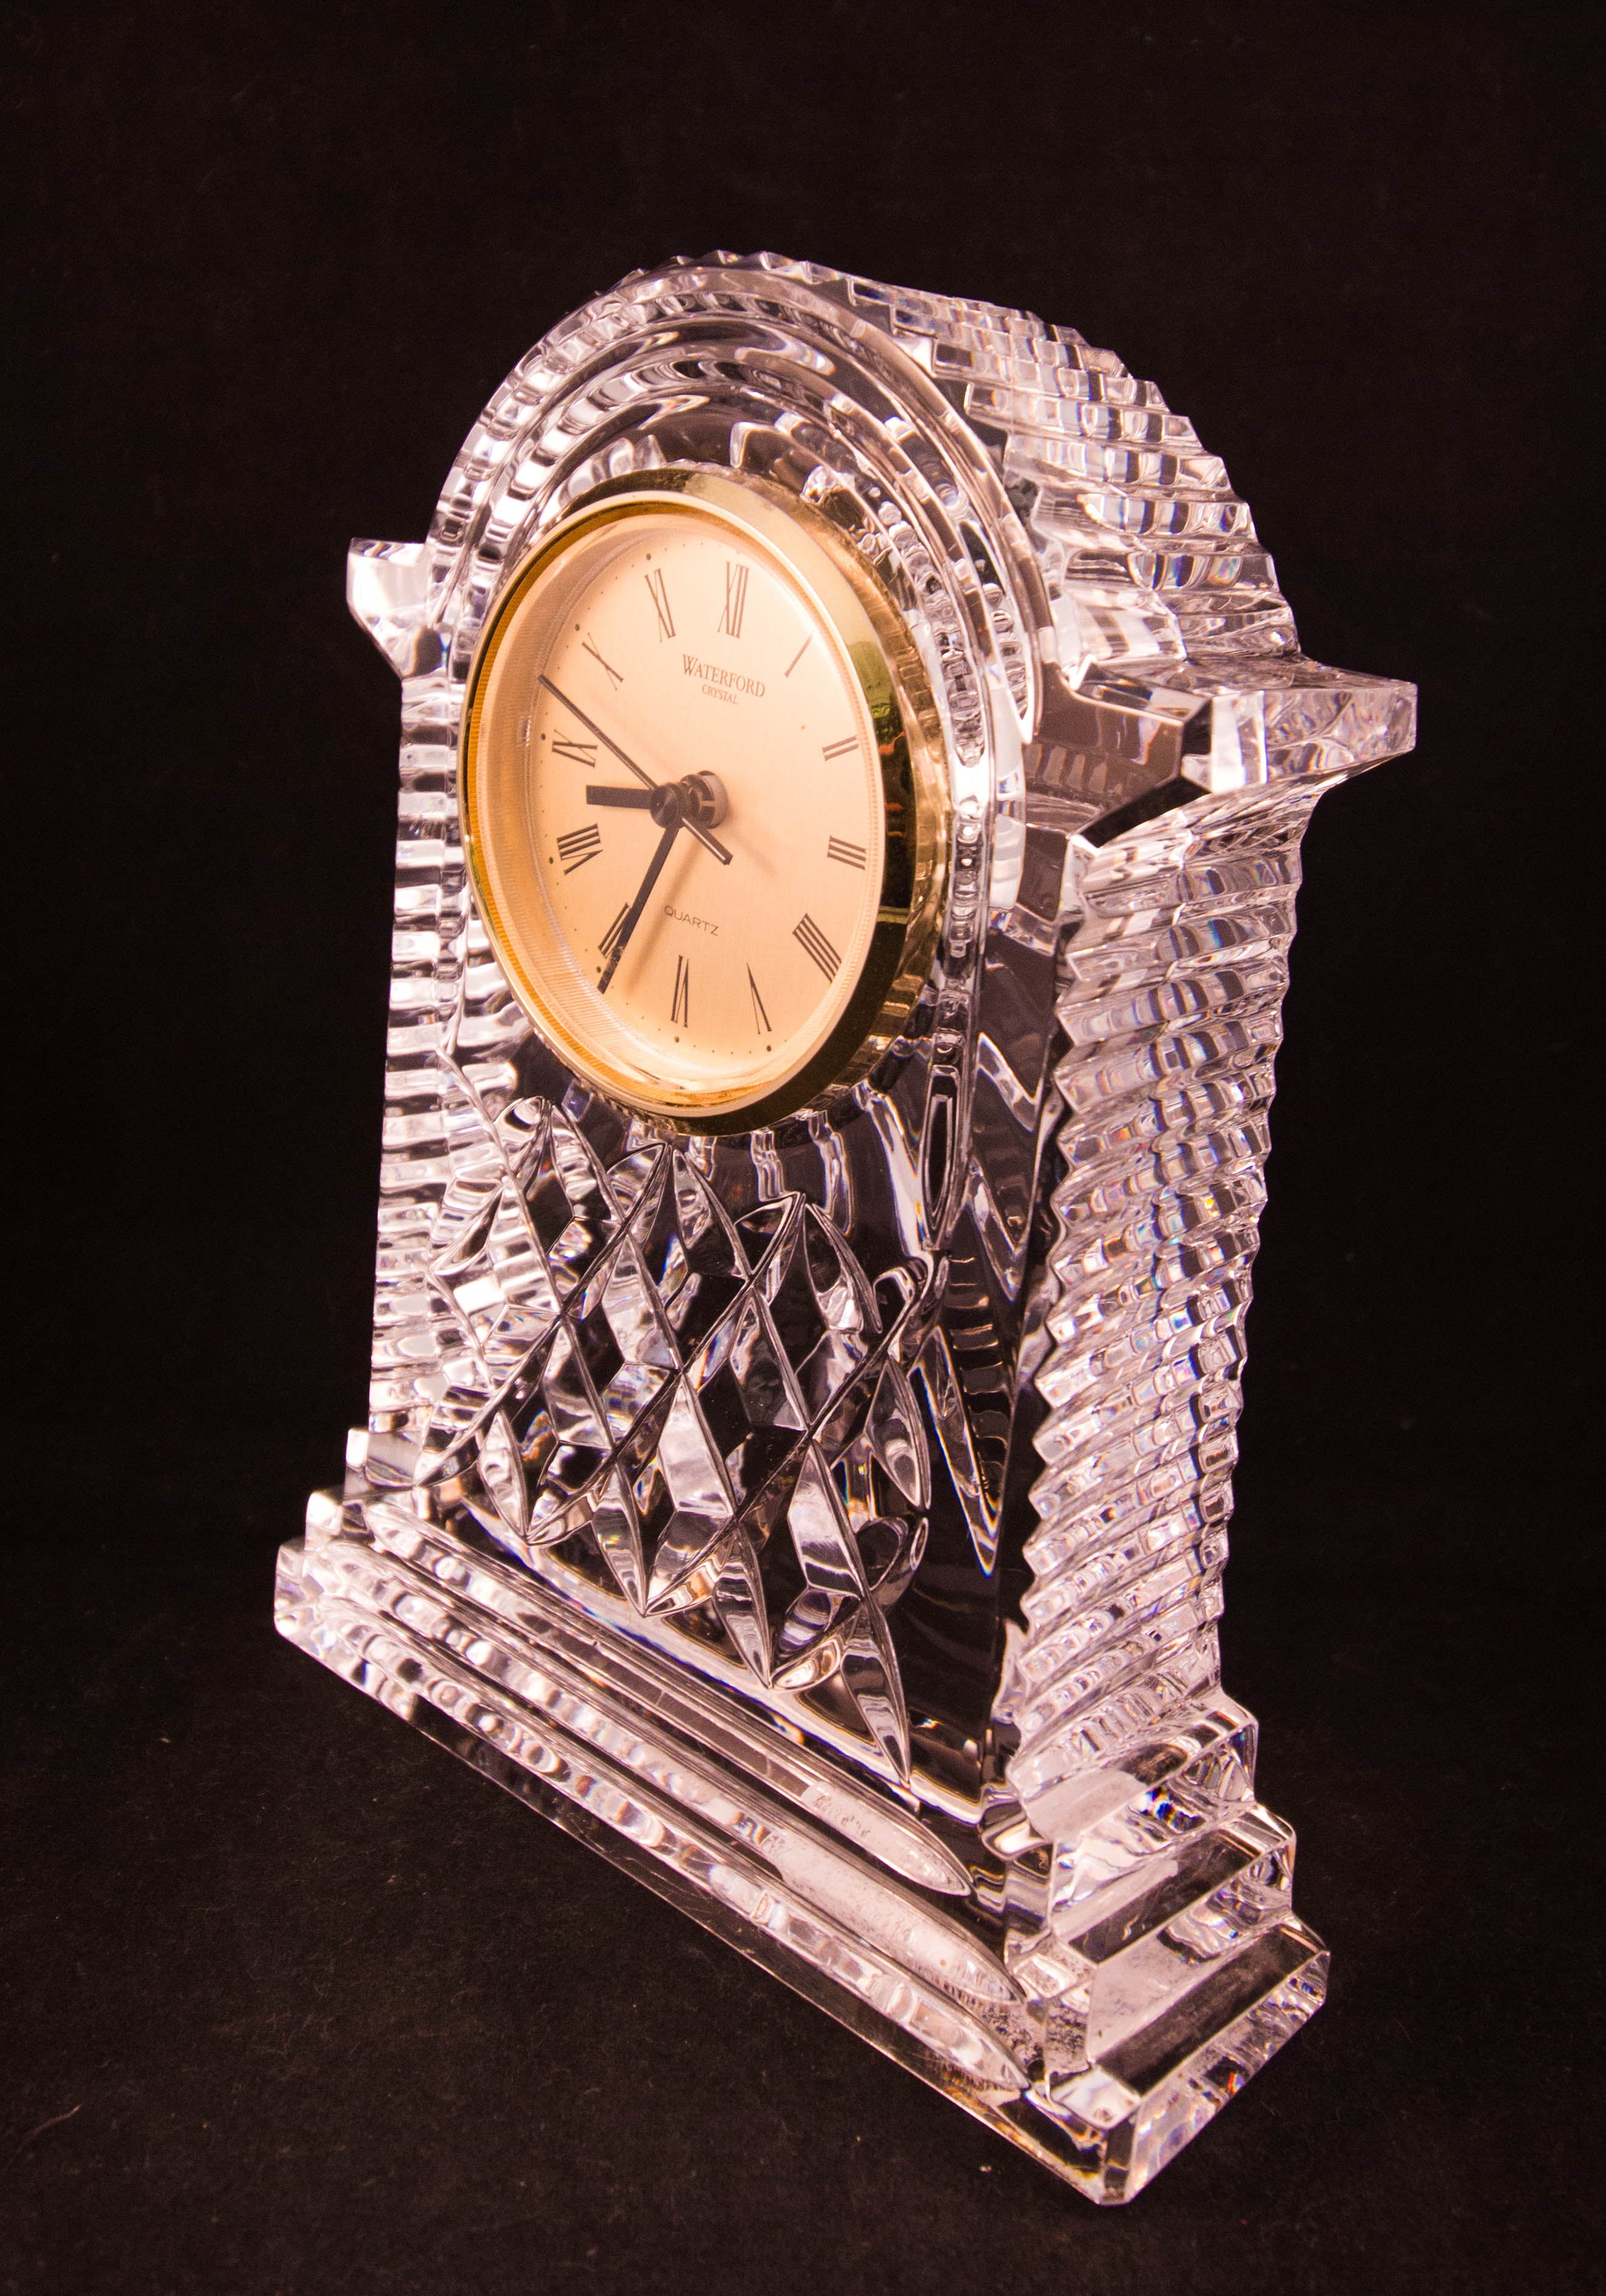 Waterford Crystal Desk Clock - Old Strathcona Antique Mall